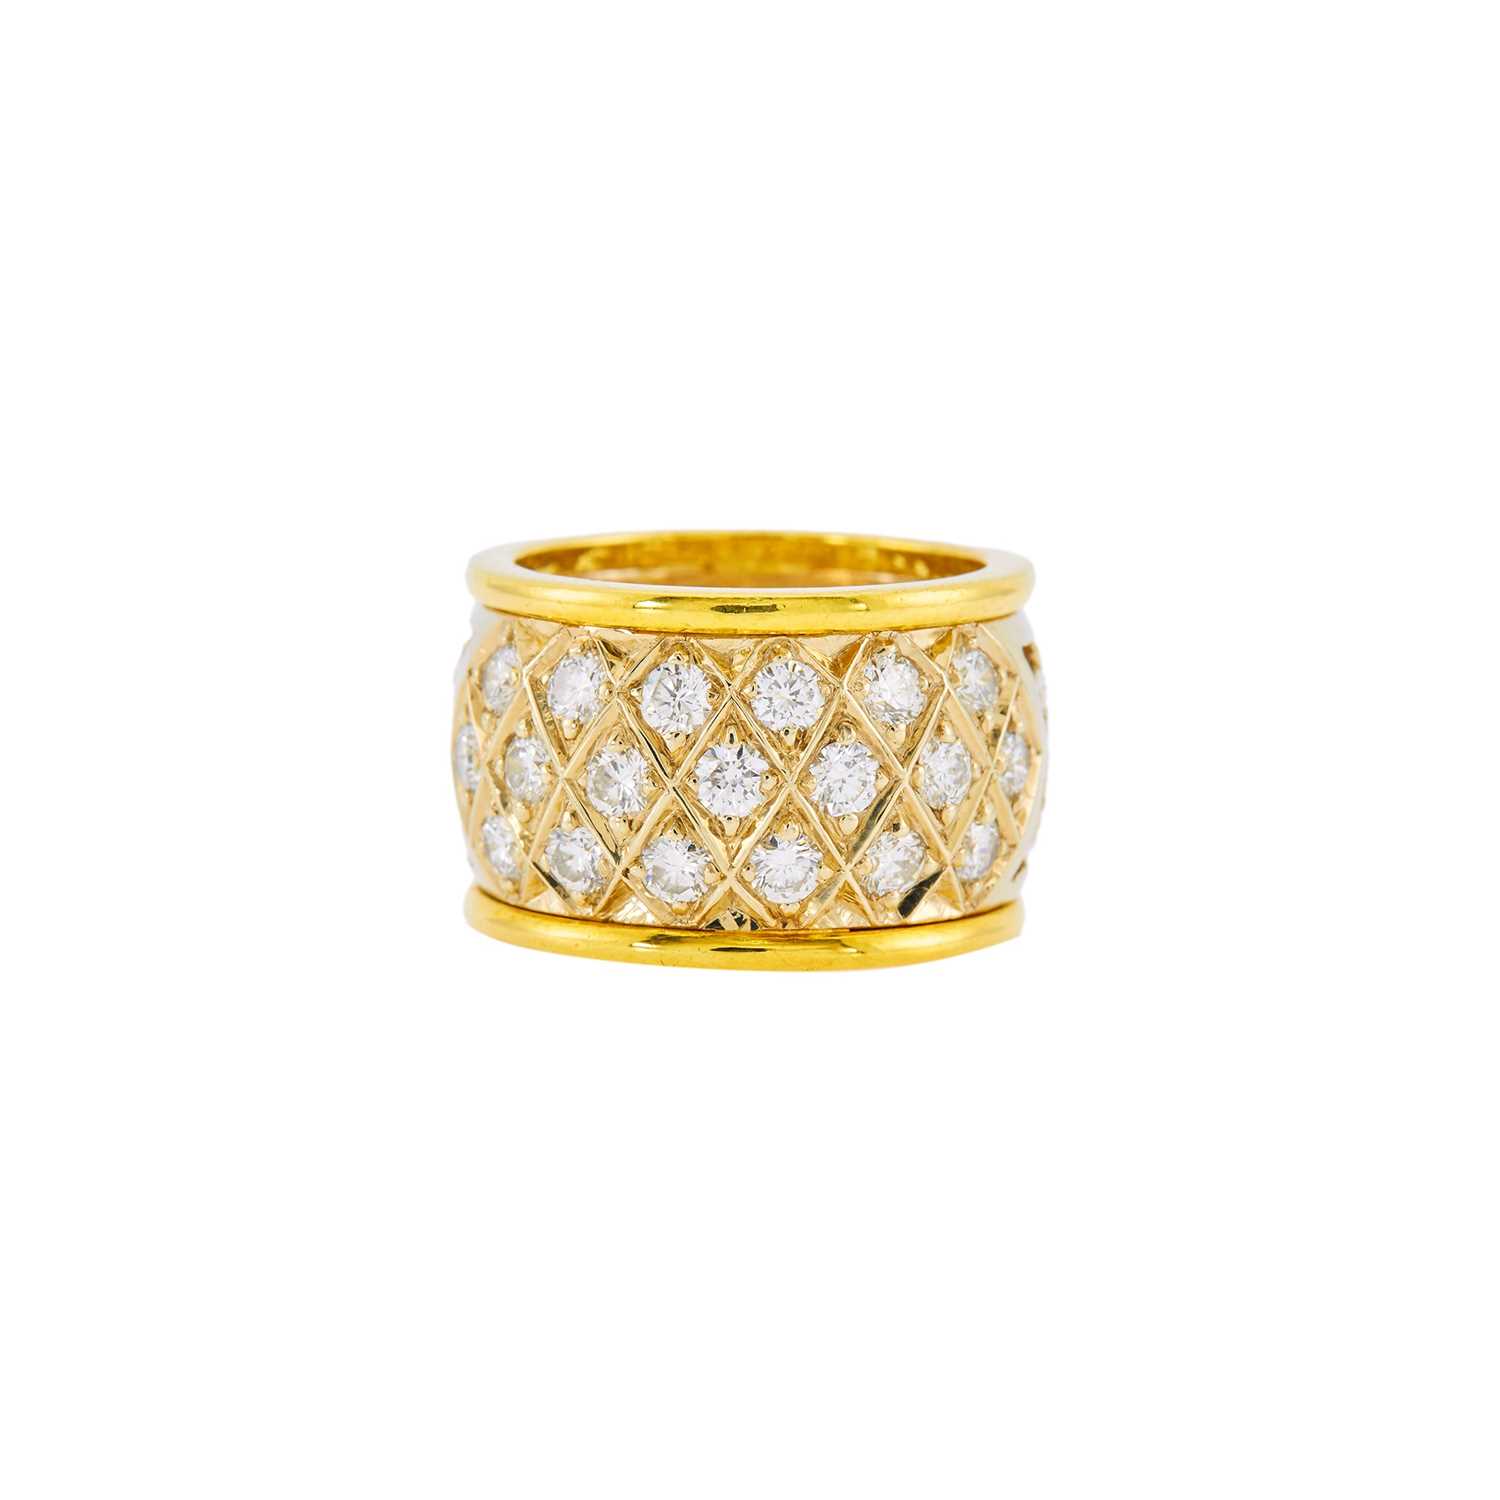 Lot 1035 - Two-Color Gold and Diamond Band Ring